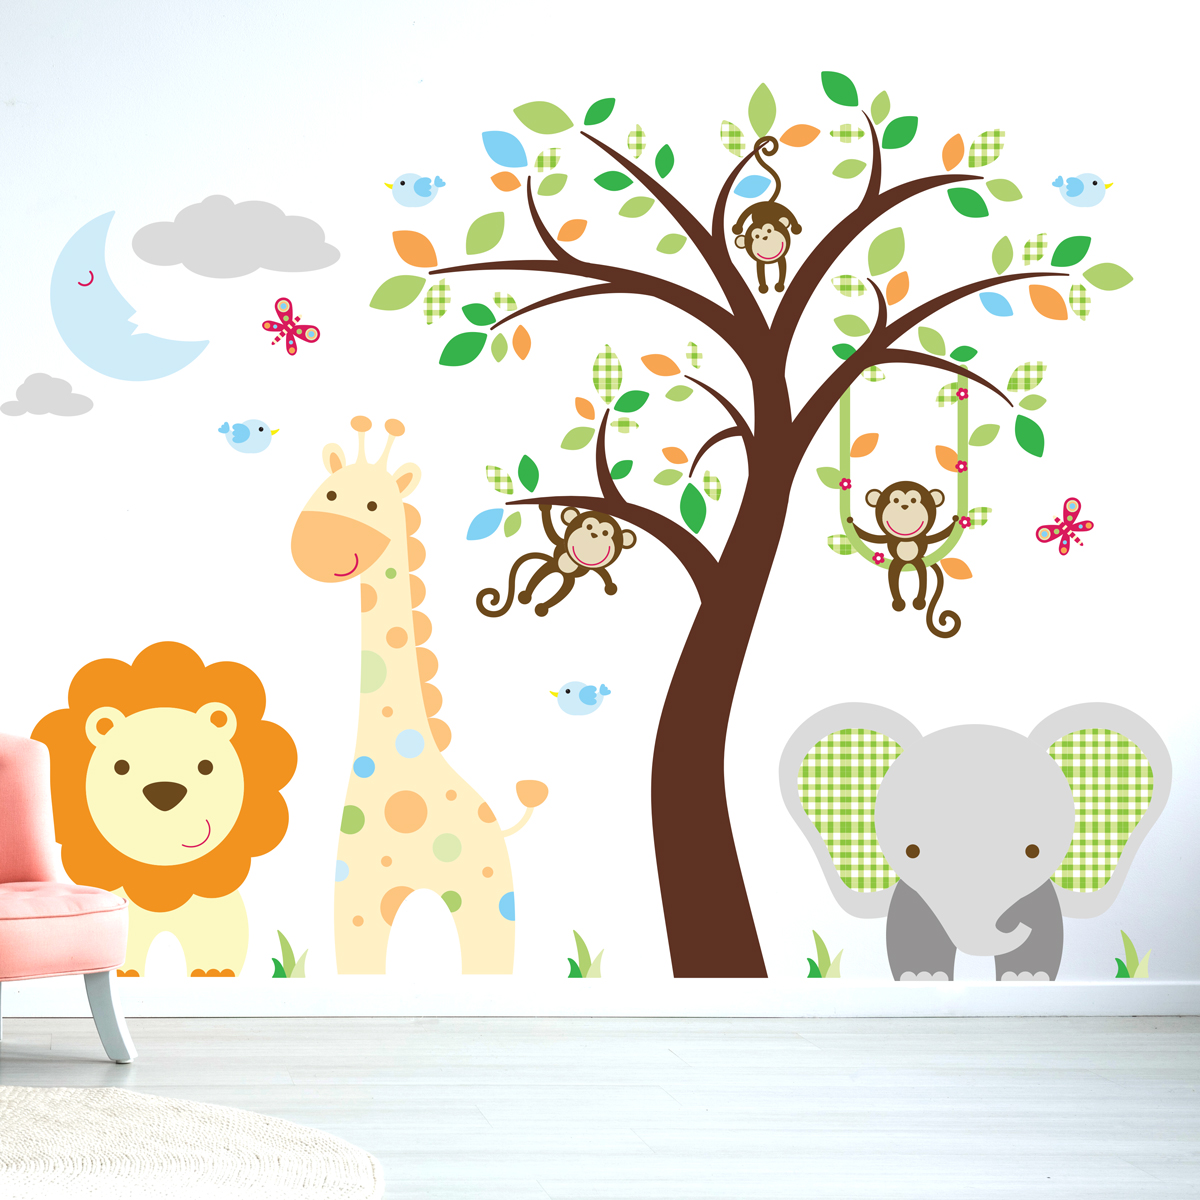 Happy animals in the jungle wall decal – Wall decals WALL DECAL ANIMALS  Jungle animals - Ambiance-sticker